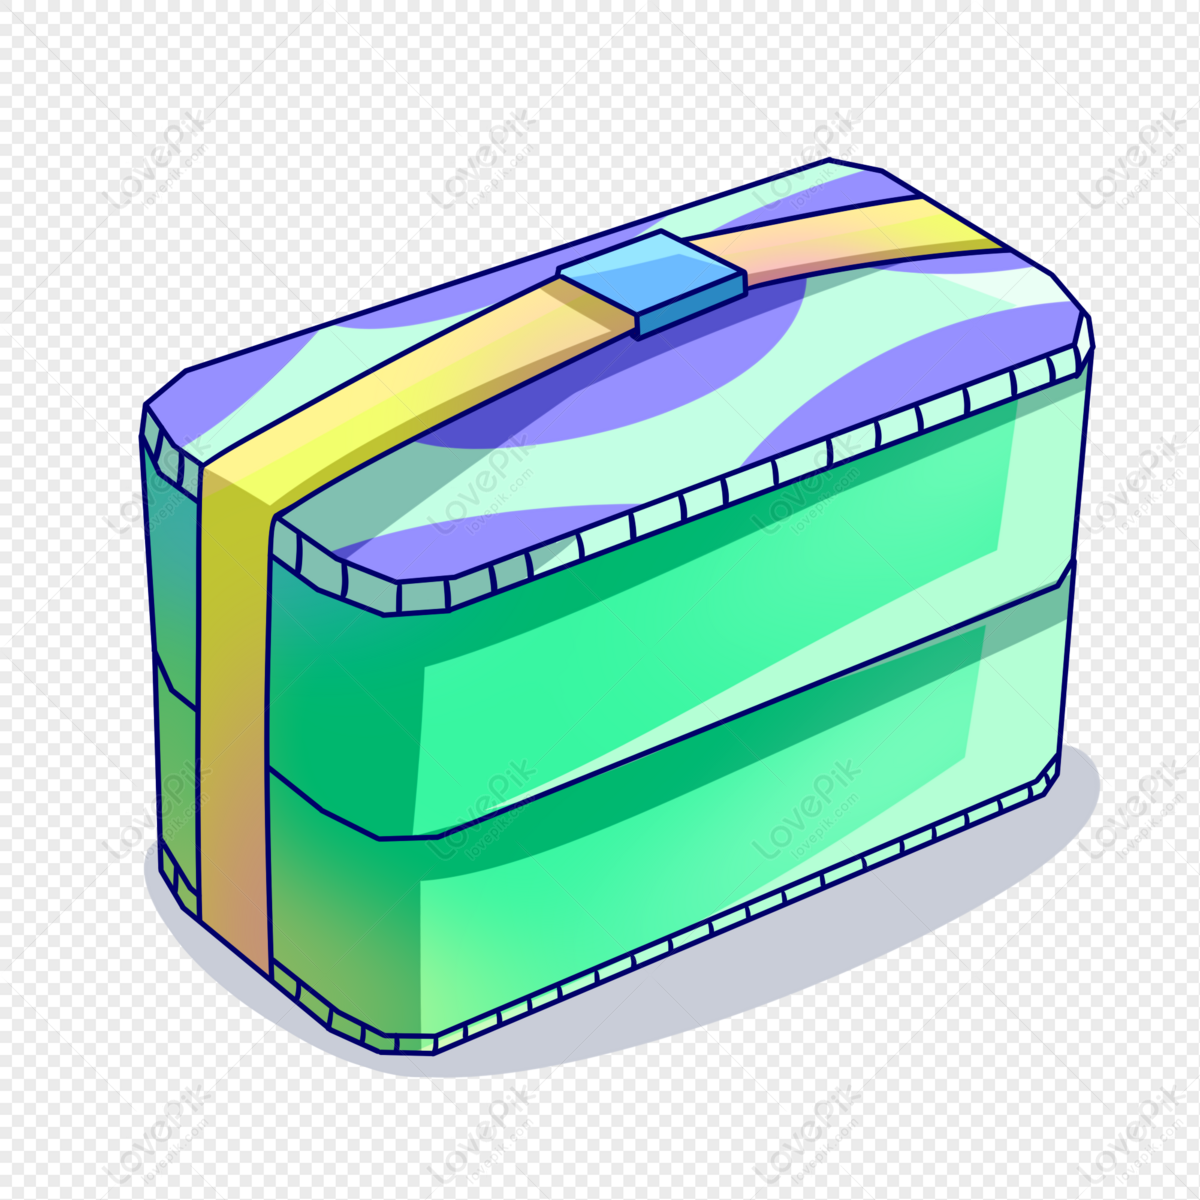 Cartoon Lunch Box Picture PNG Transparent Image And Clipart Image For Free  Download - Lovepik | 401483637